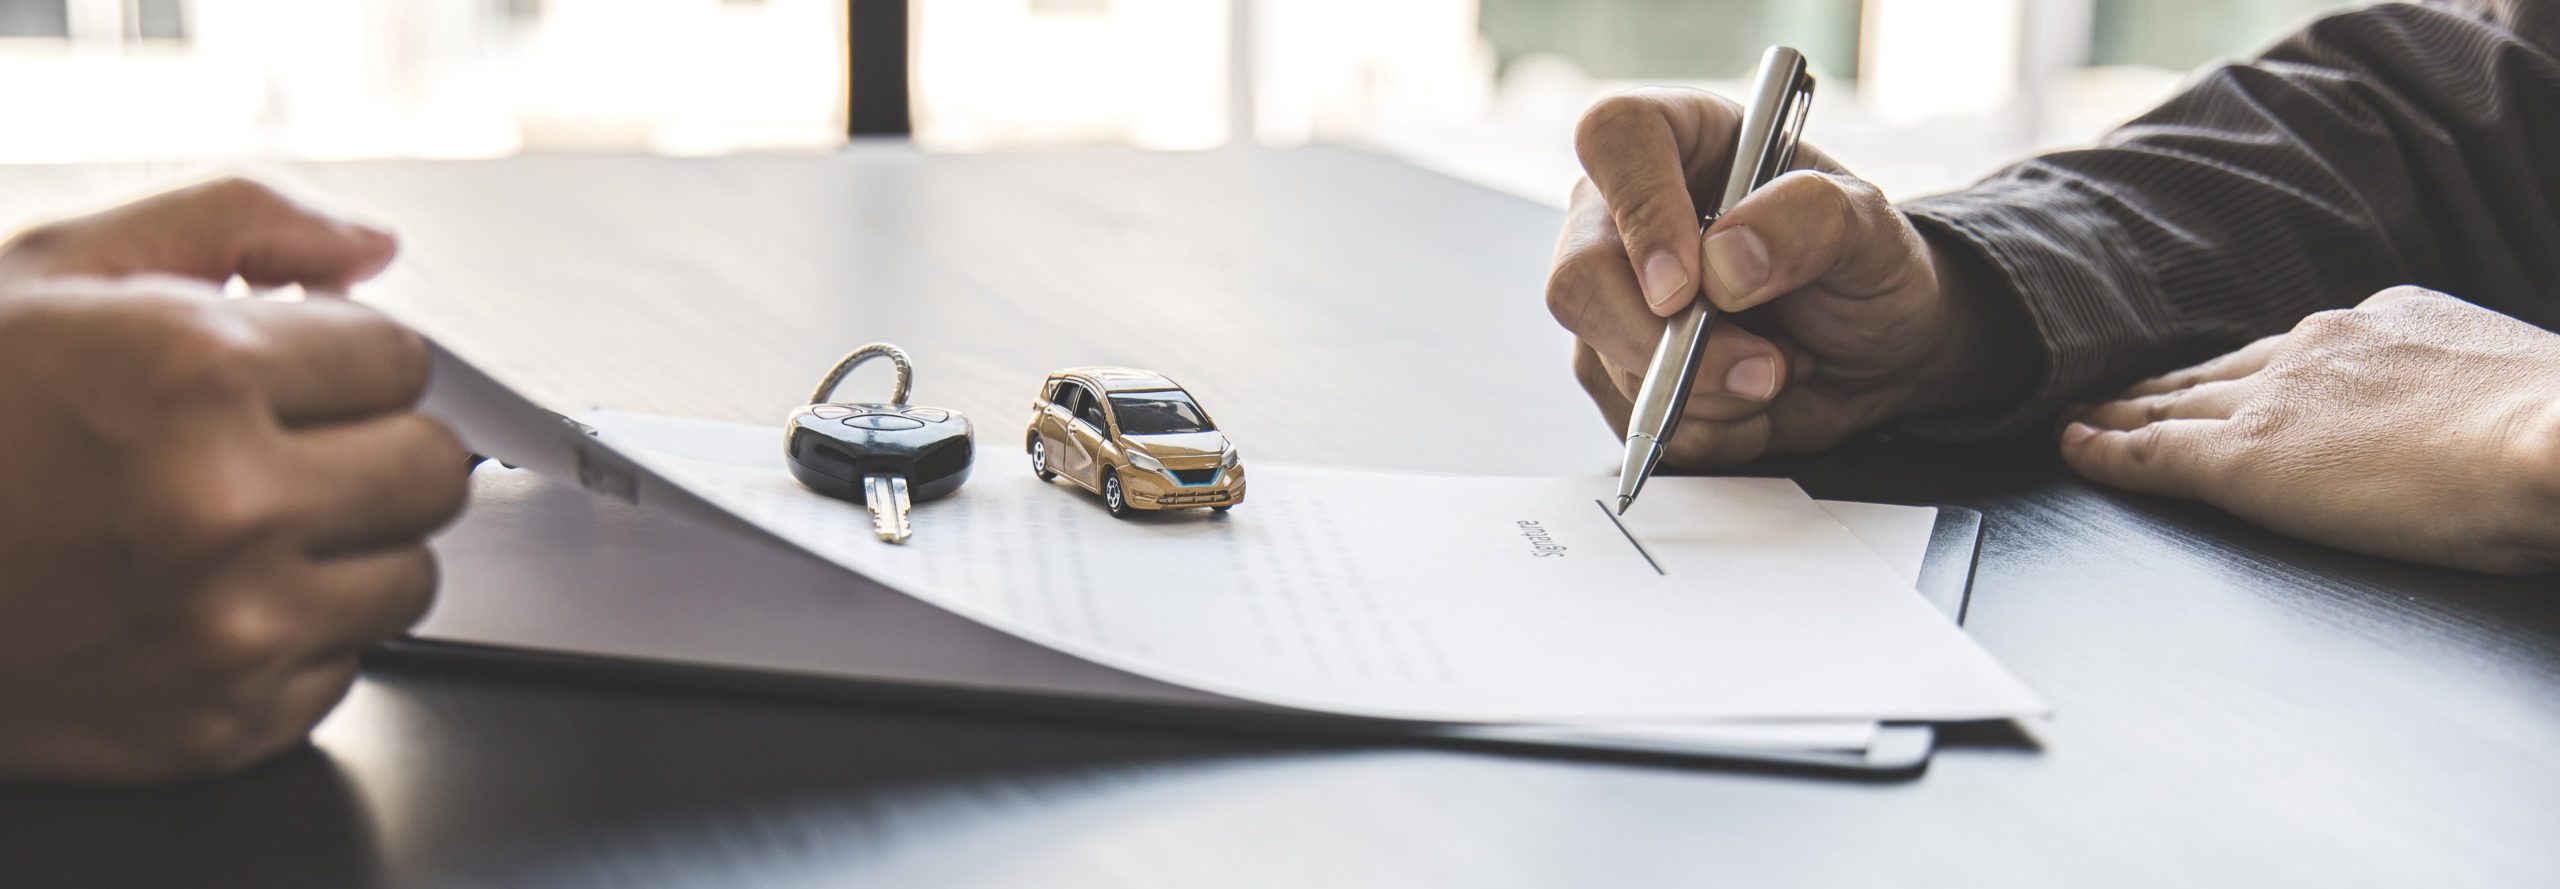 Commercial Auto Insurance—What is it and What are the Advantages?